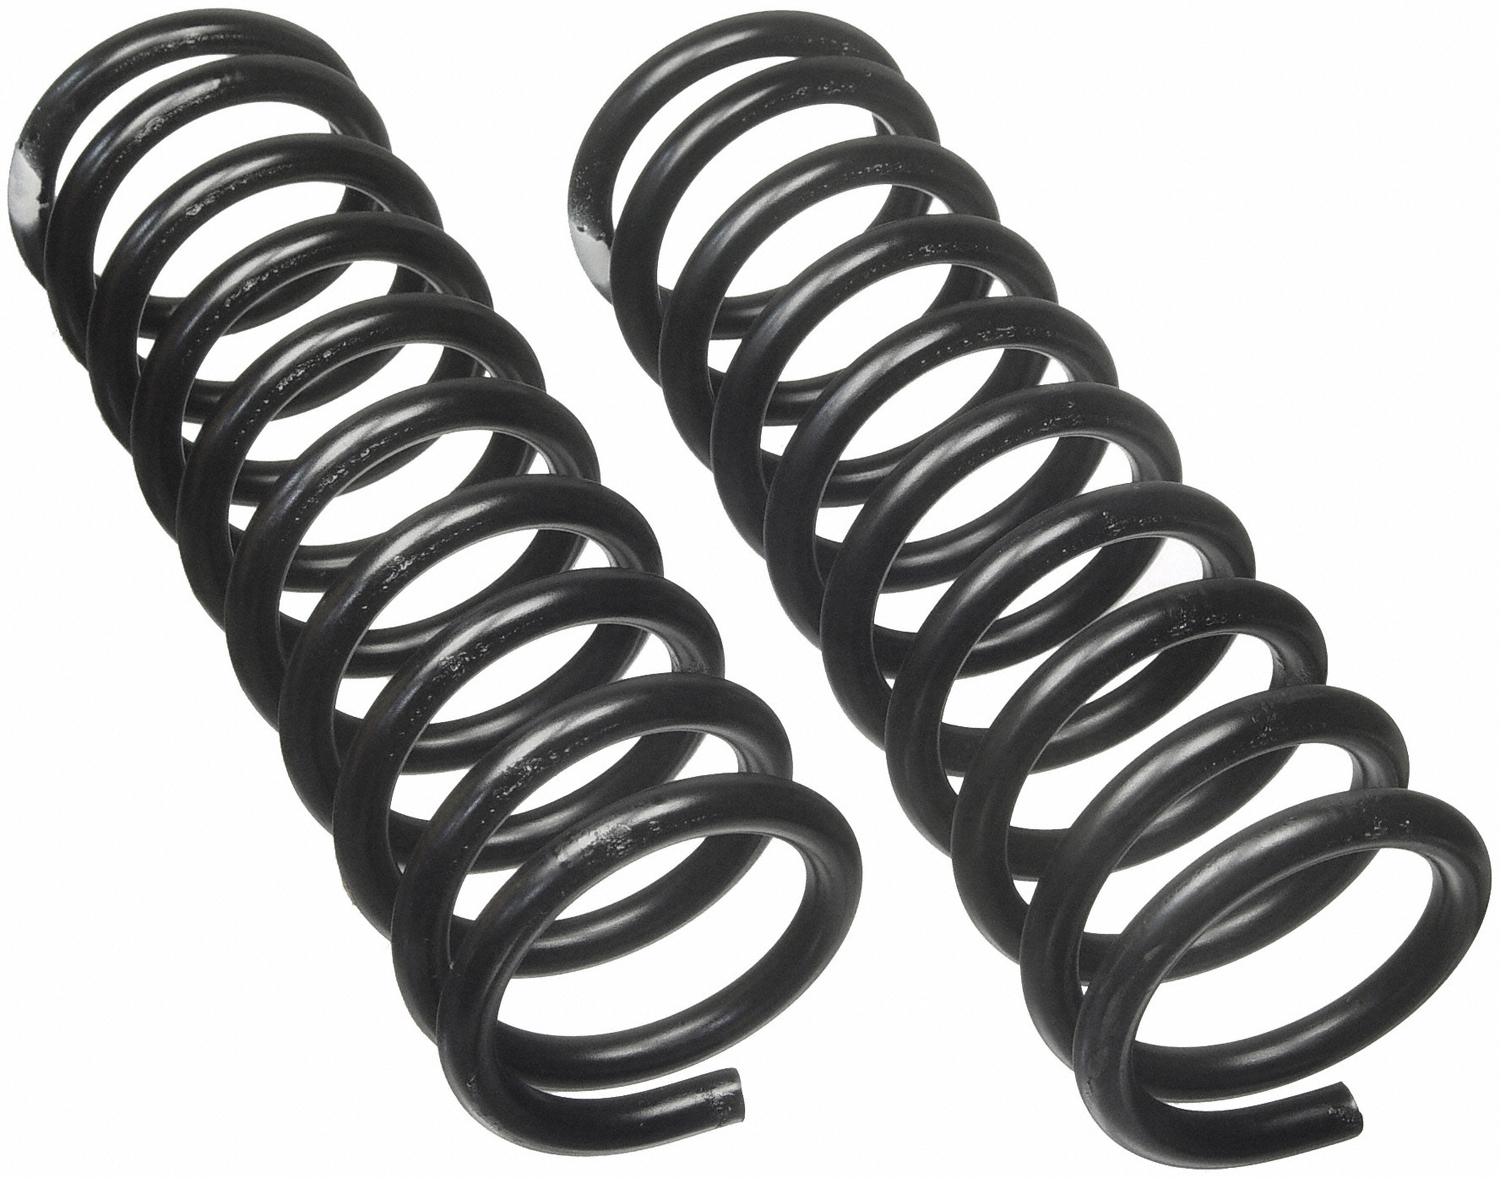 Image of ID 5030 Moog 5030 Coil Spring Set Fits 1984-1985 Buick LeSabre